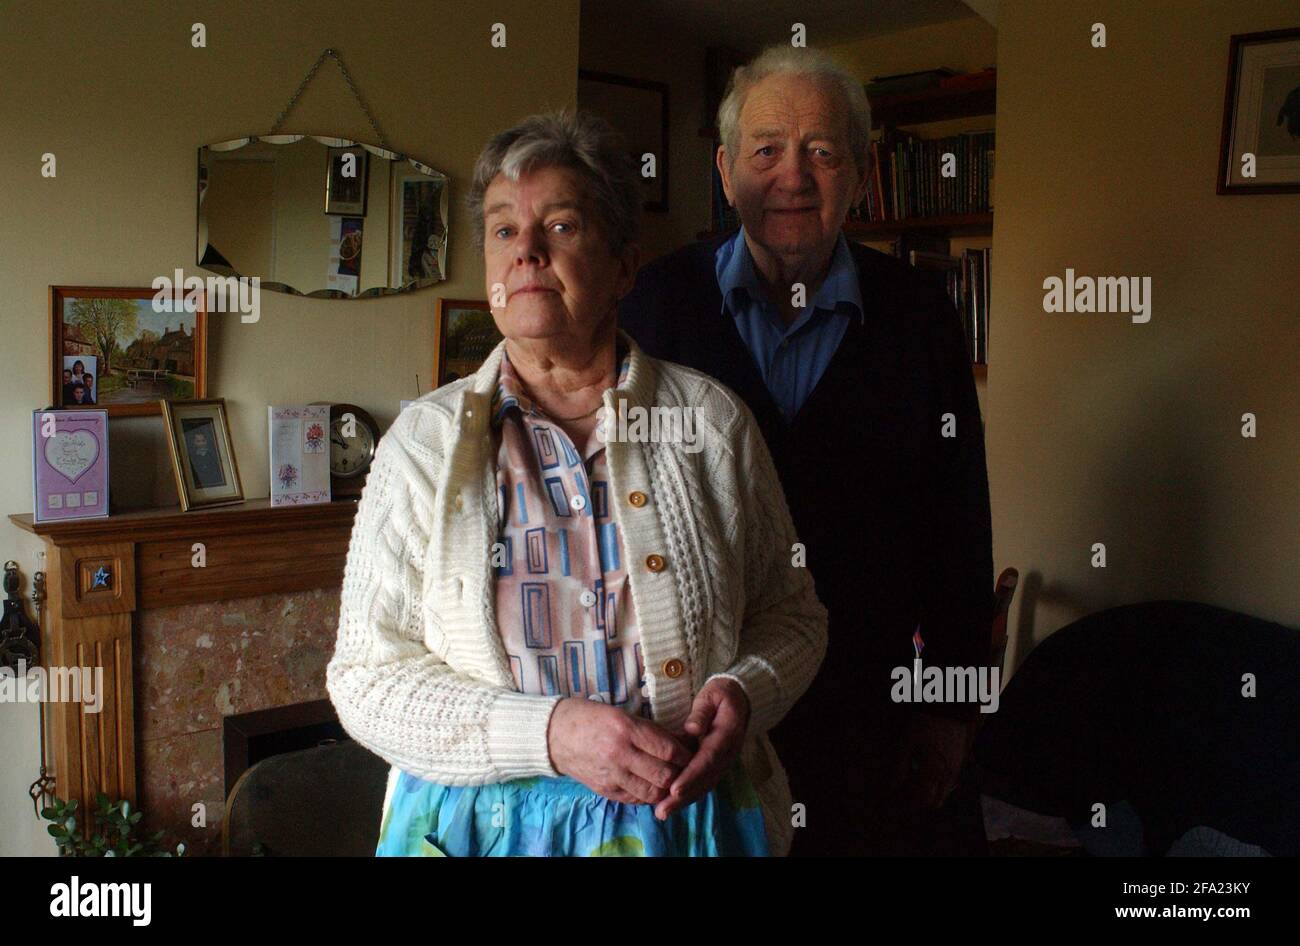 BRIAN AND AUDREY BROARD AT THEIR HOME IN PURTON,WILTS.20/3/07 TOM PILSTON. Stock Photo